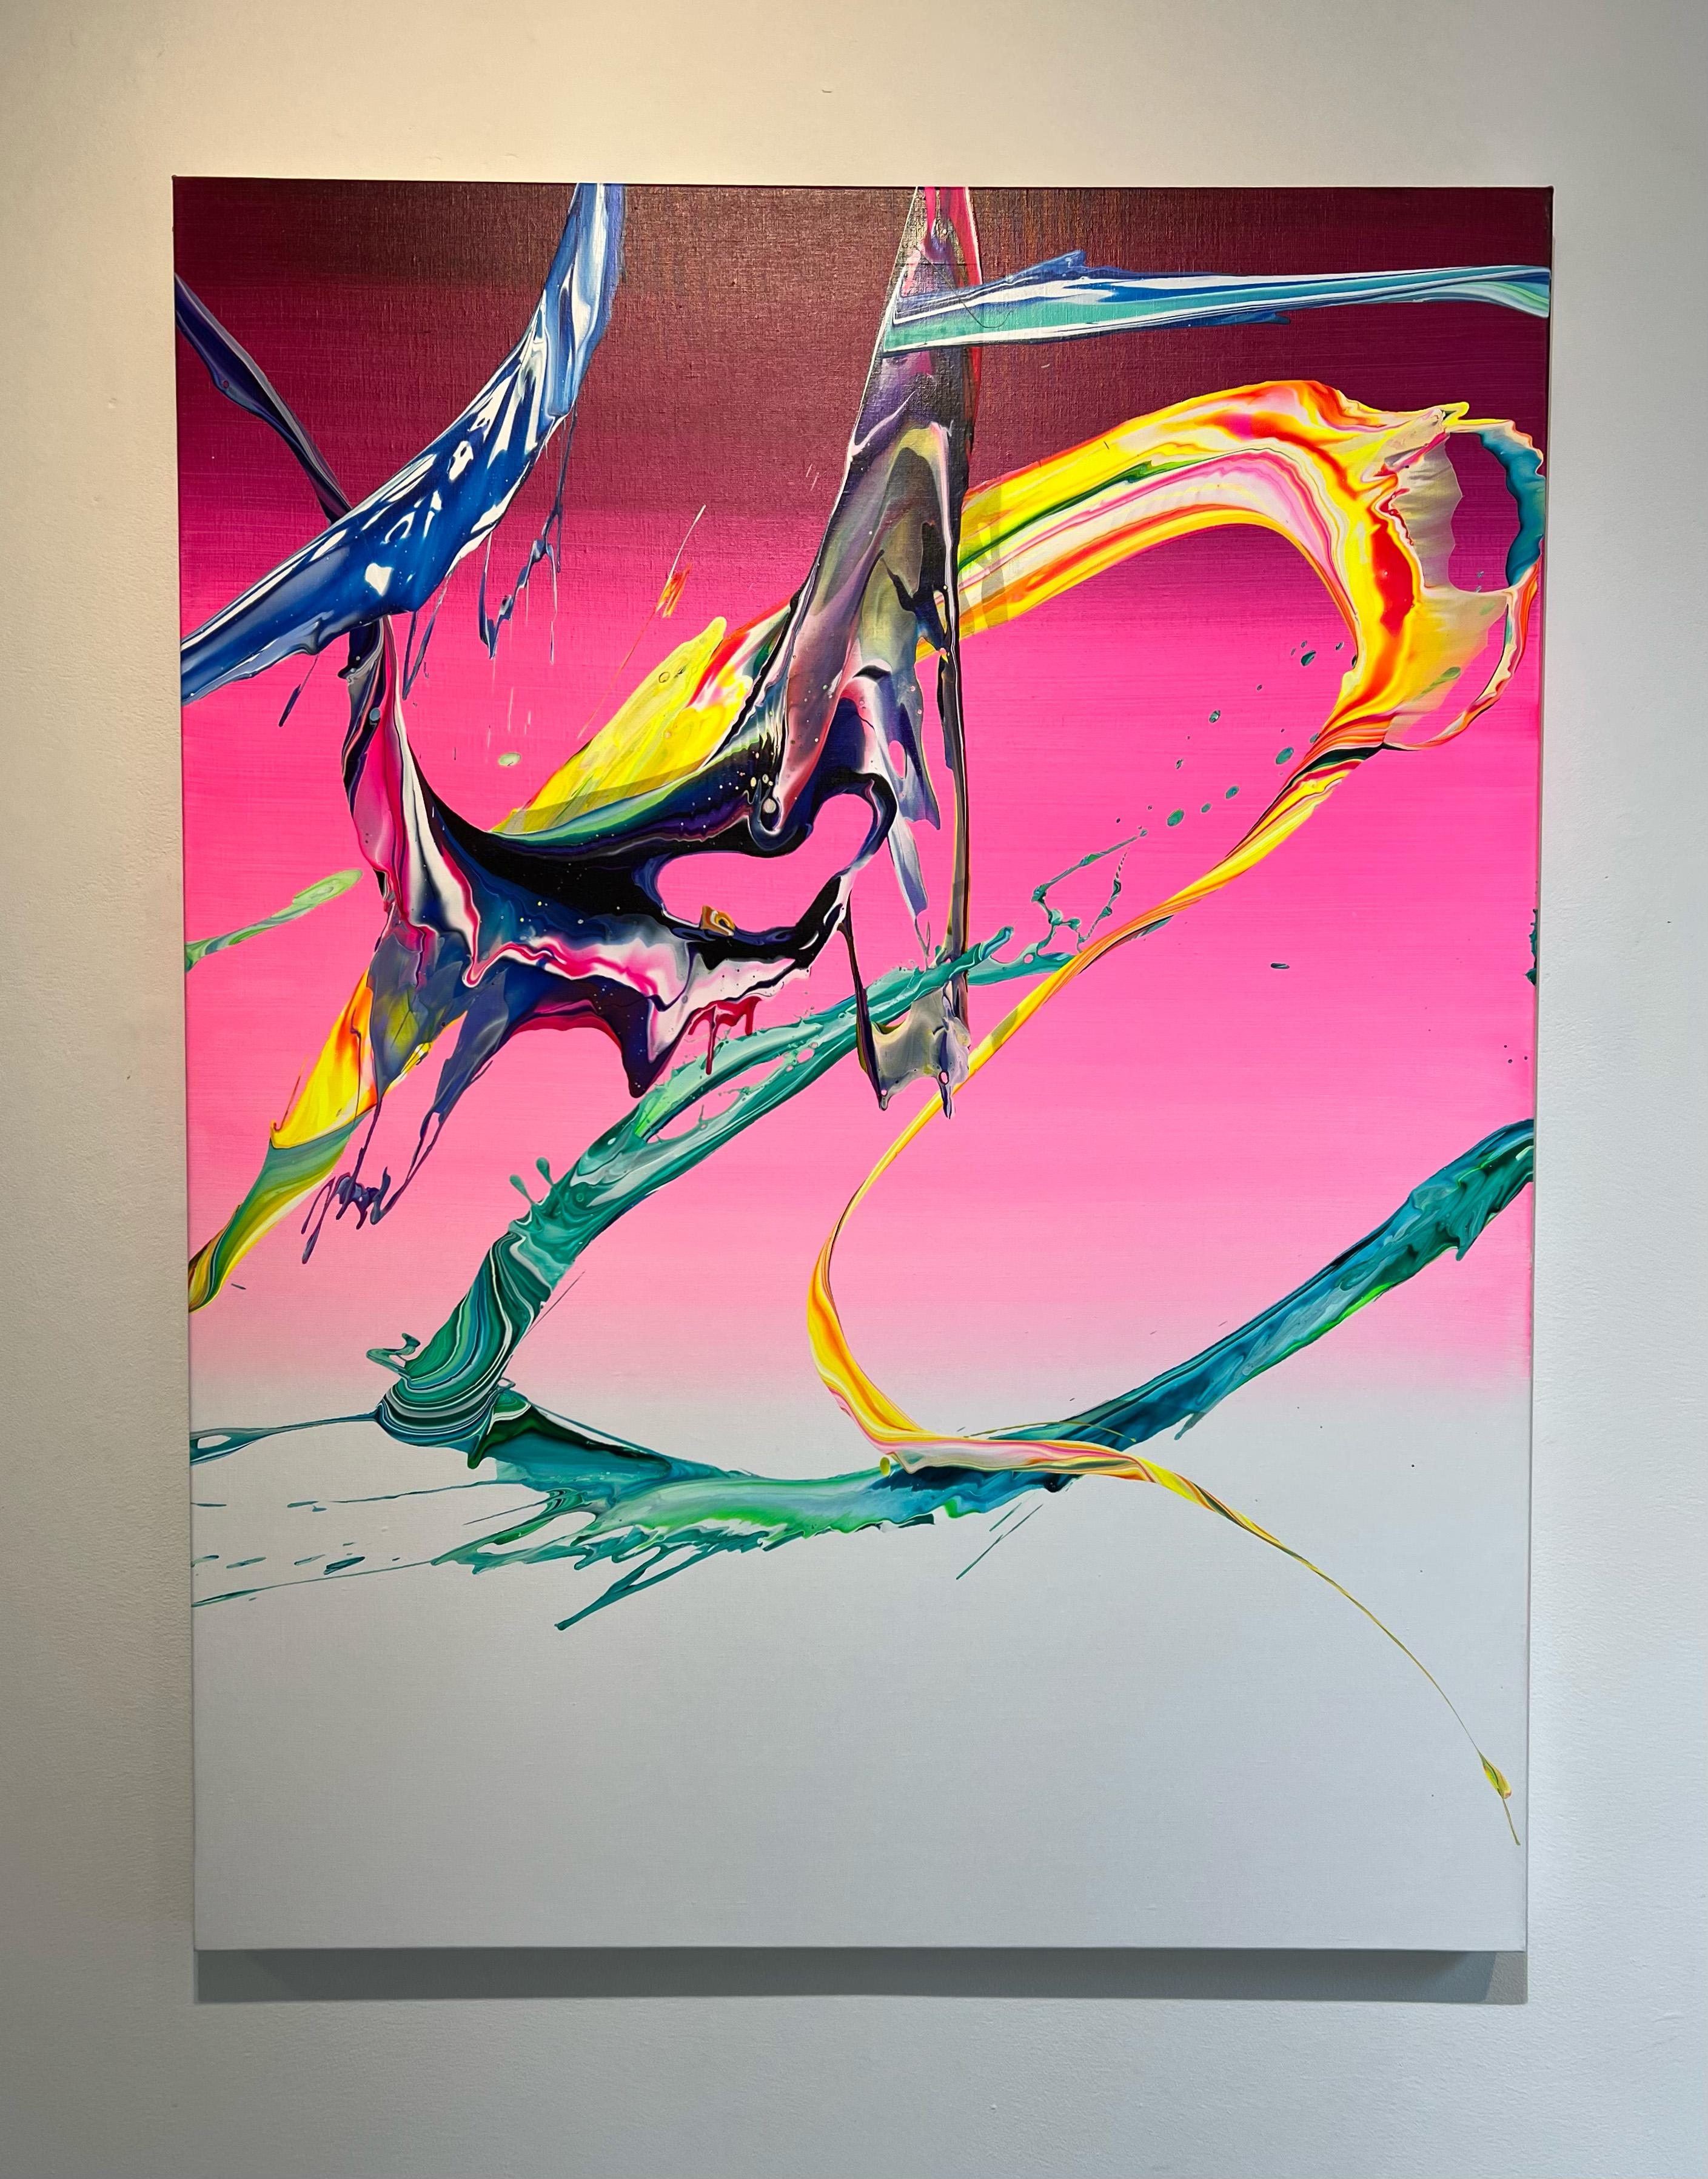 AV 763 - A Liquid Abstraction in Vivid Colors Against a Pink to White Ombré - Painting by Alex Voinea